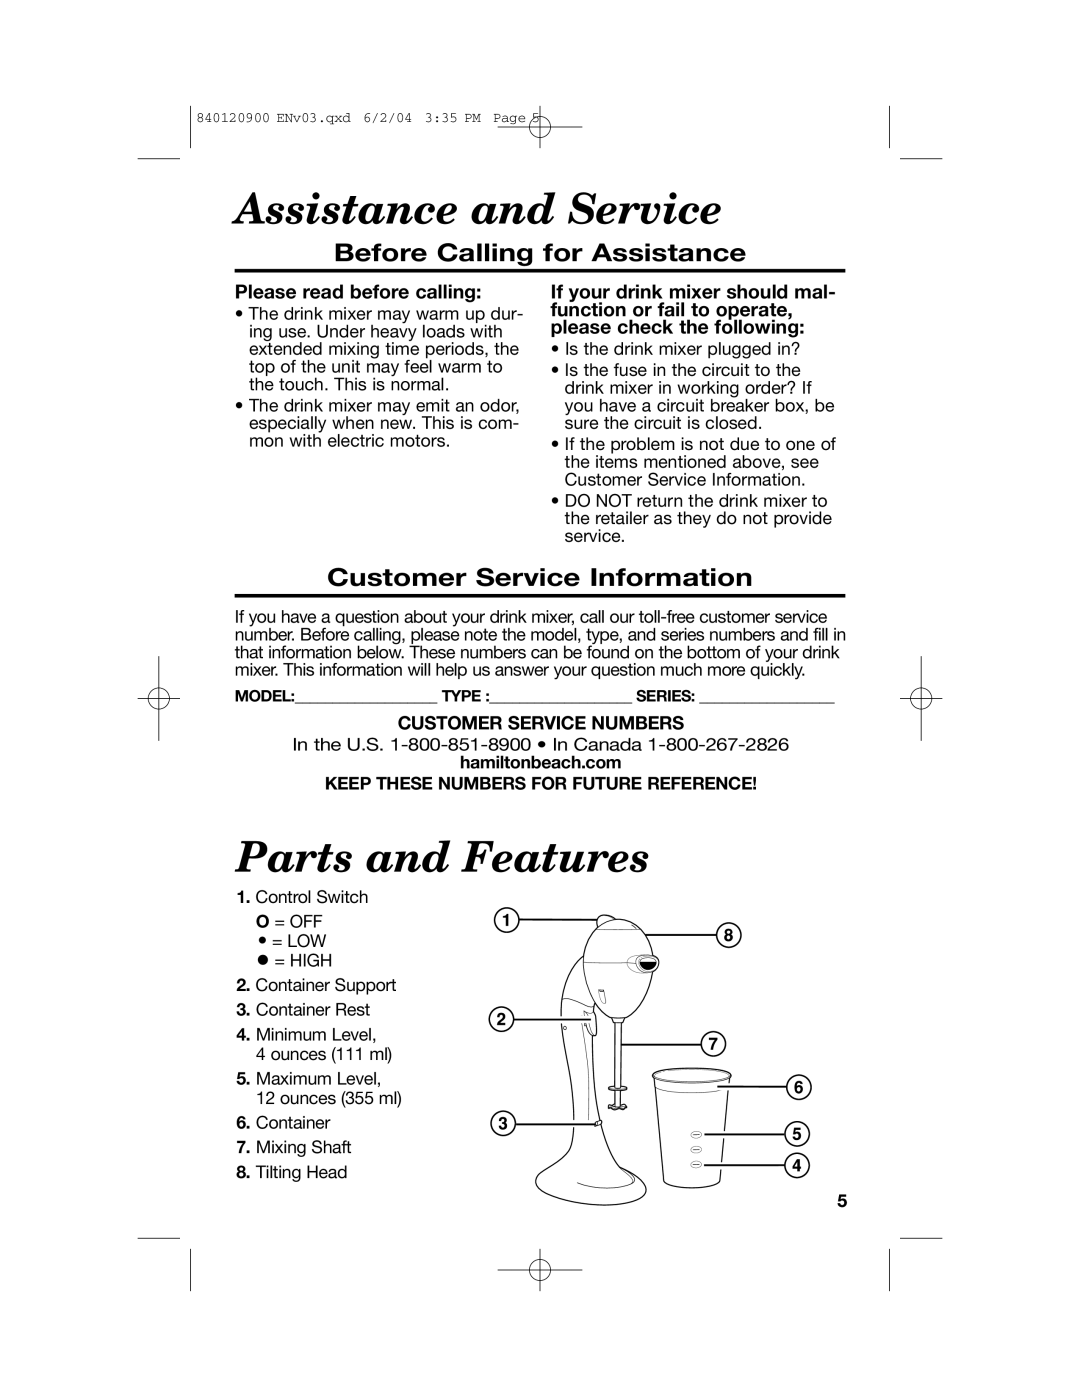 Hamilton Beach ALL-METAL DRINK MIXER manual Assistance and Service, Parts and Features, Before Calling for Assistance 